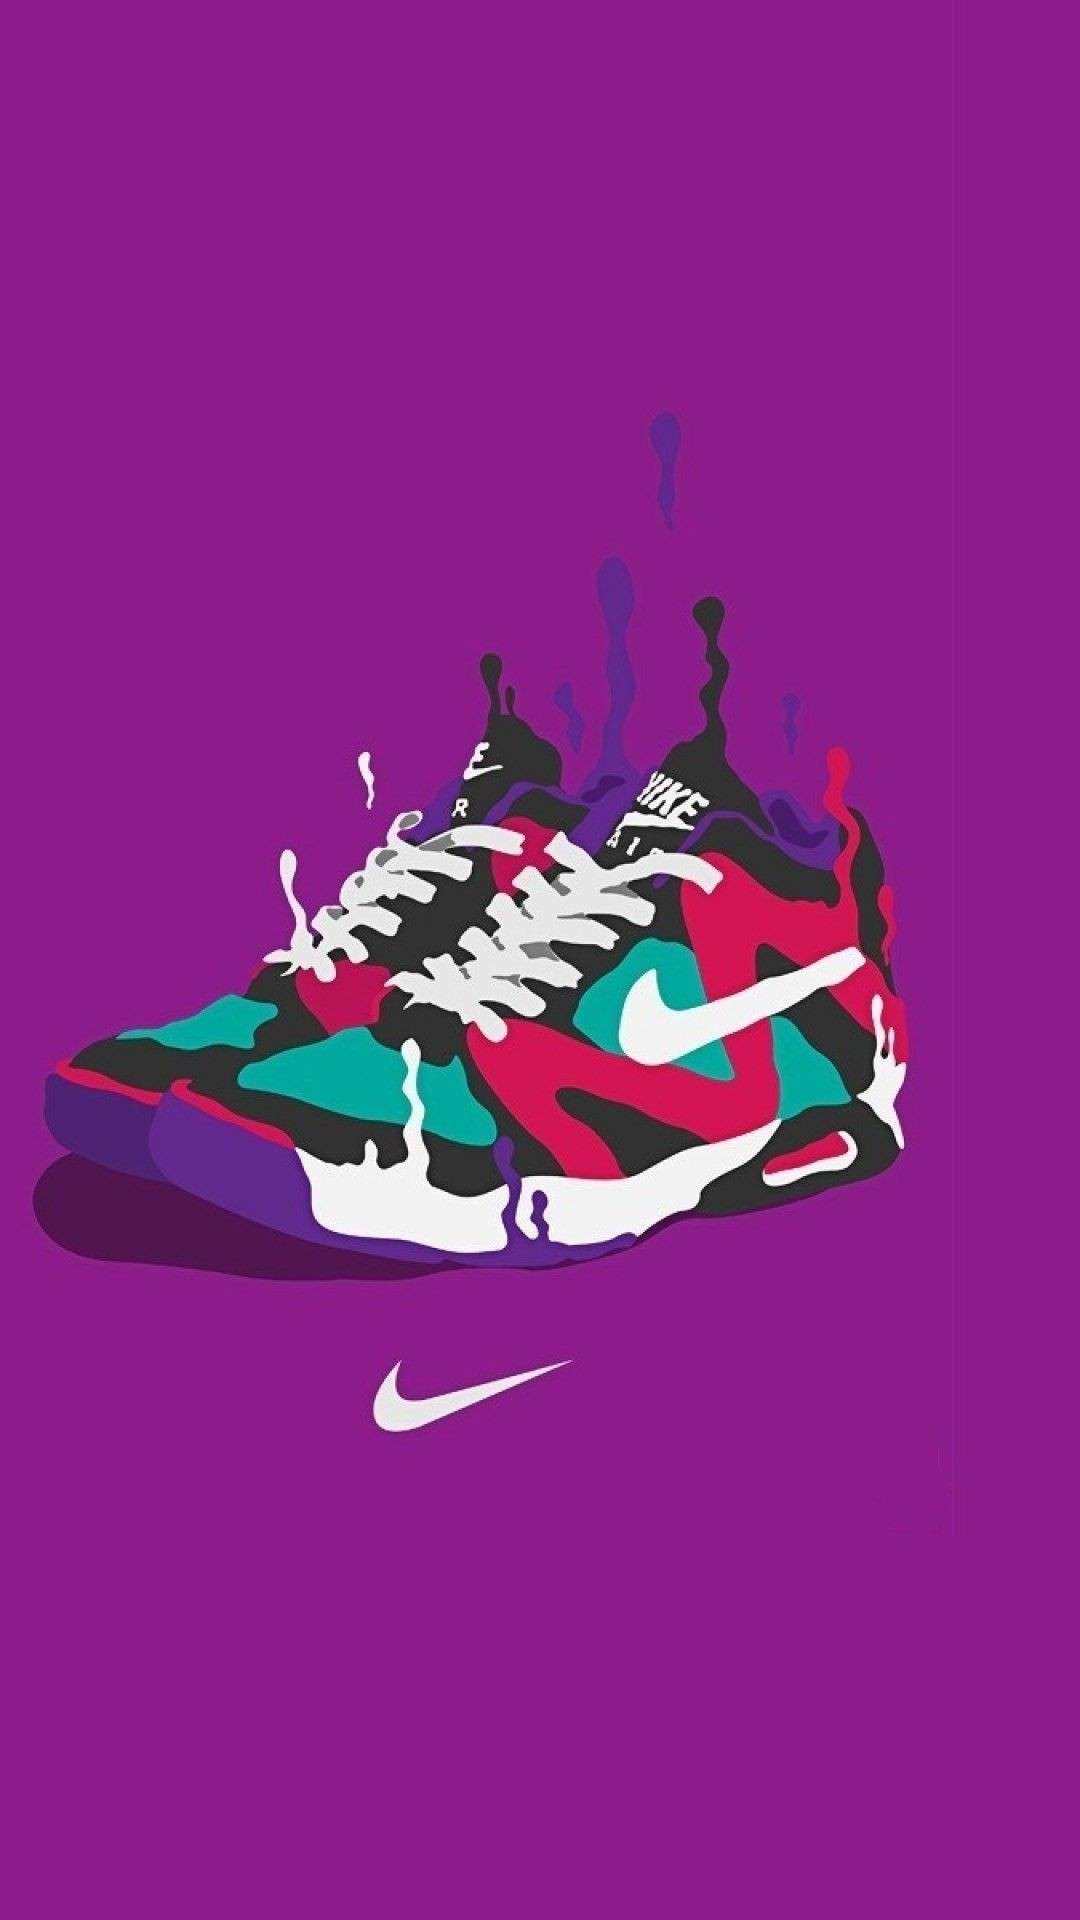 Nike Boxes Wallpapers